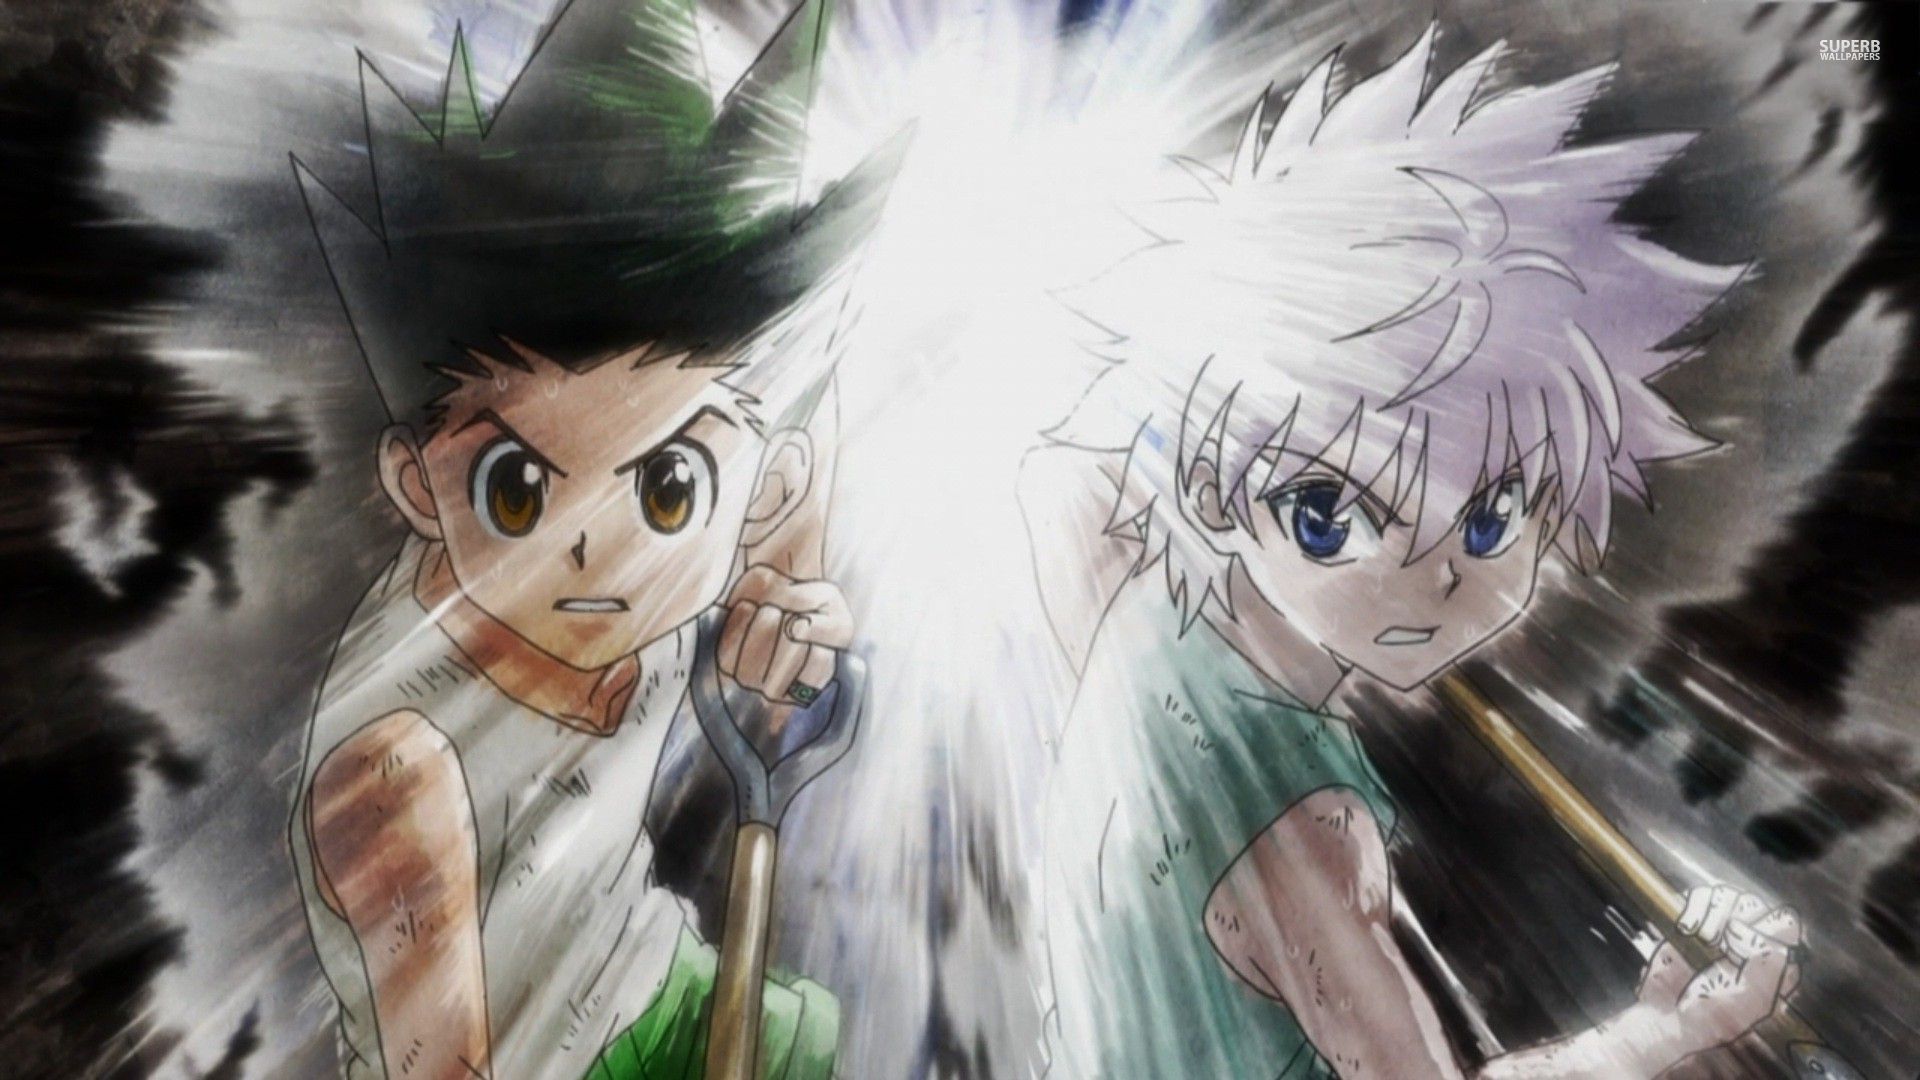 Hunter x Hunter Phone Wallpaper by 烏鴨 - Mobile Abyss